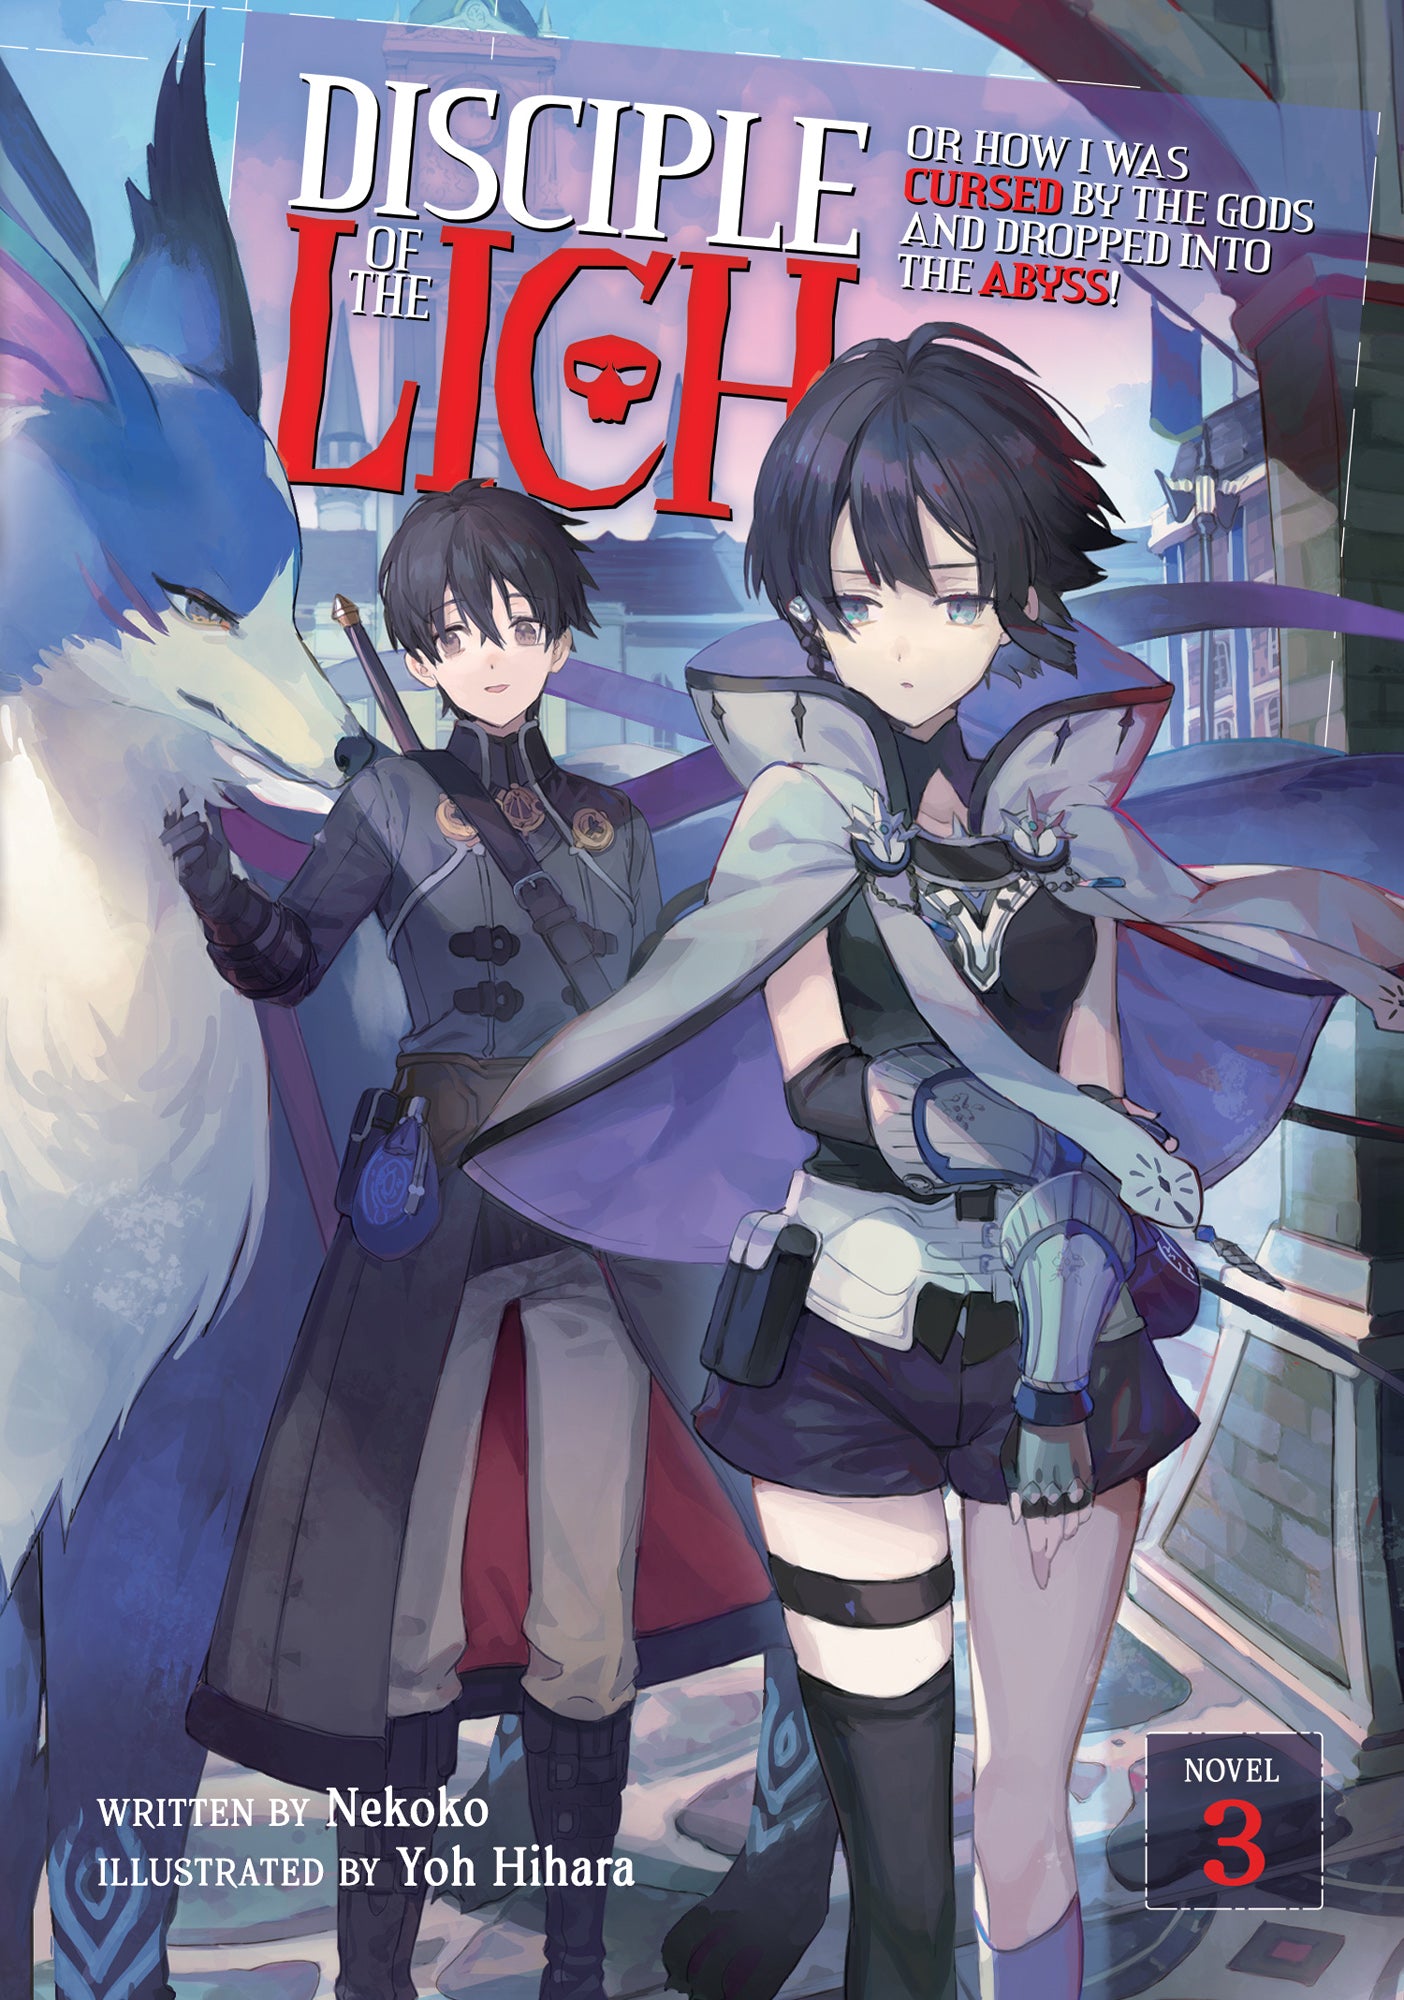 Disciple of the Lich: Or How I Was Cursed by the Gods and Dropped Into the Abyss! (Light Novel) Vol. 03